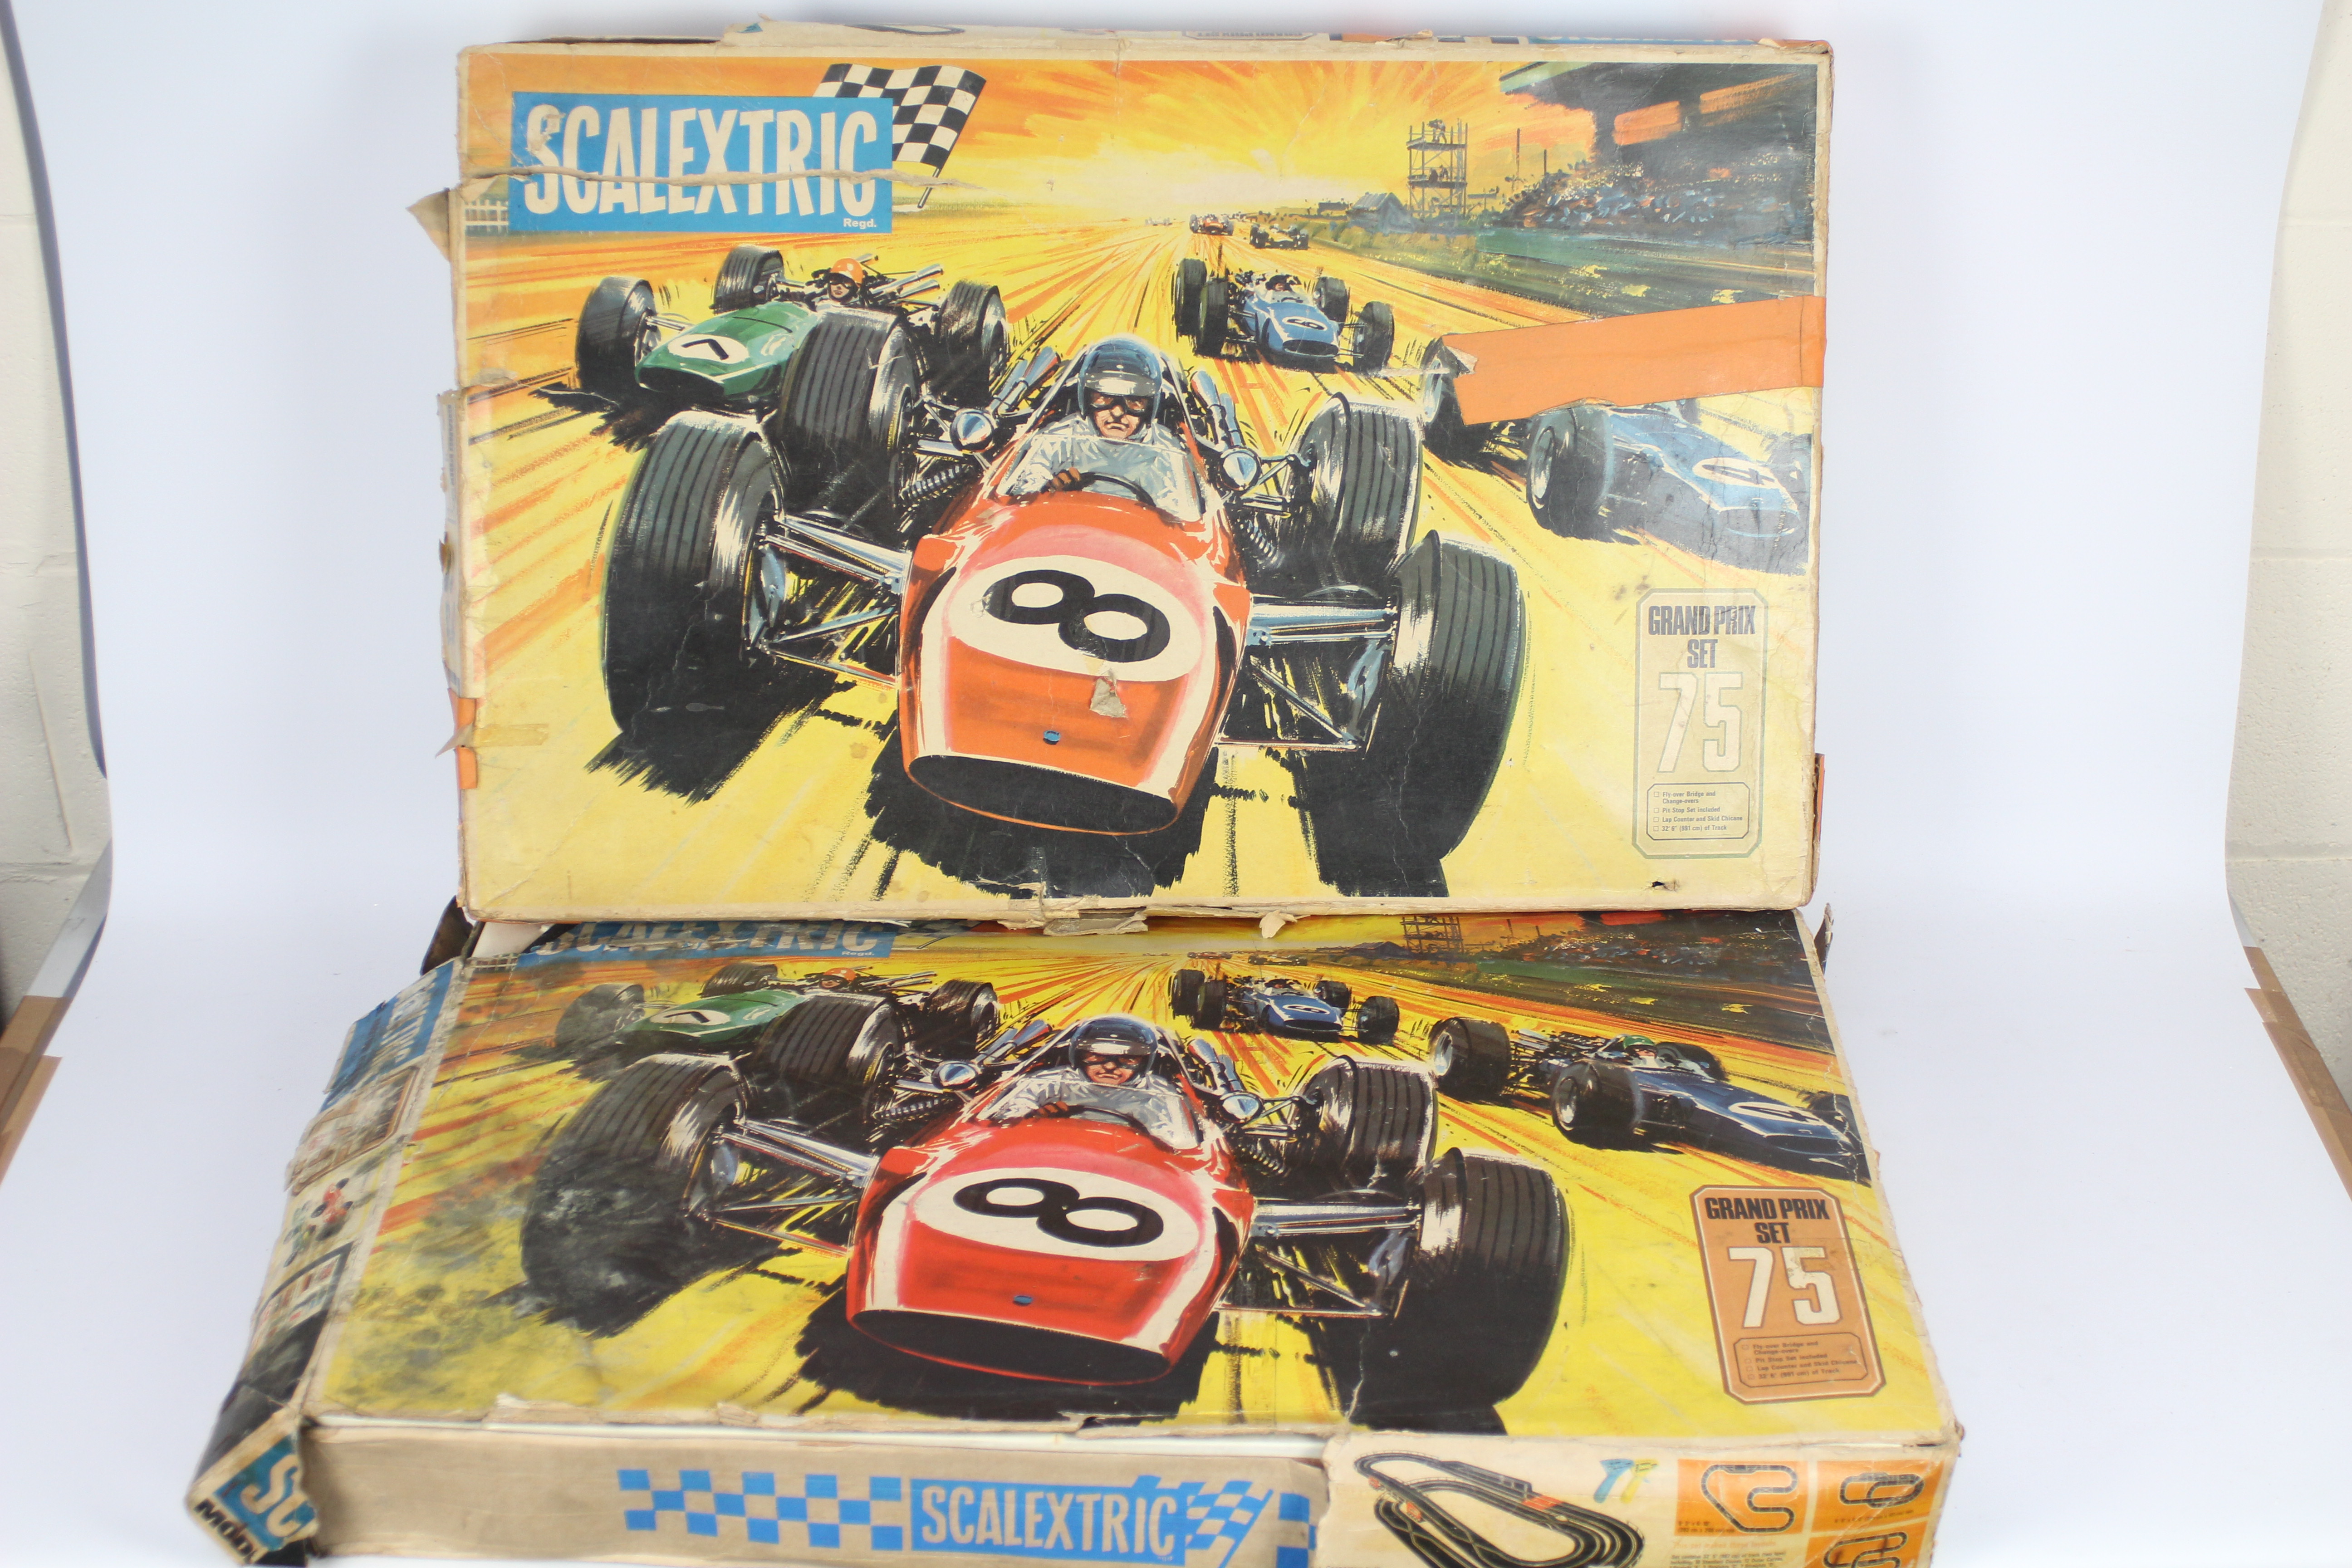 Scalextric - 2 x vintage boxed Grand Prix 75 sets in 1:32 scale.